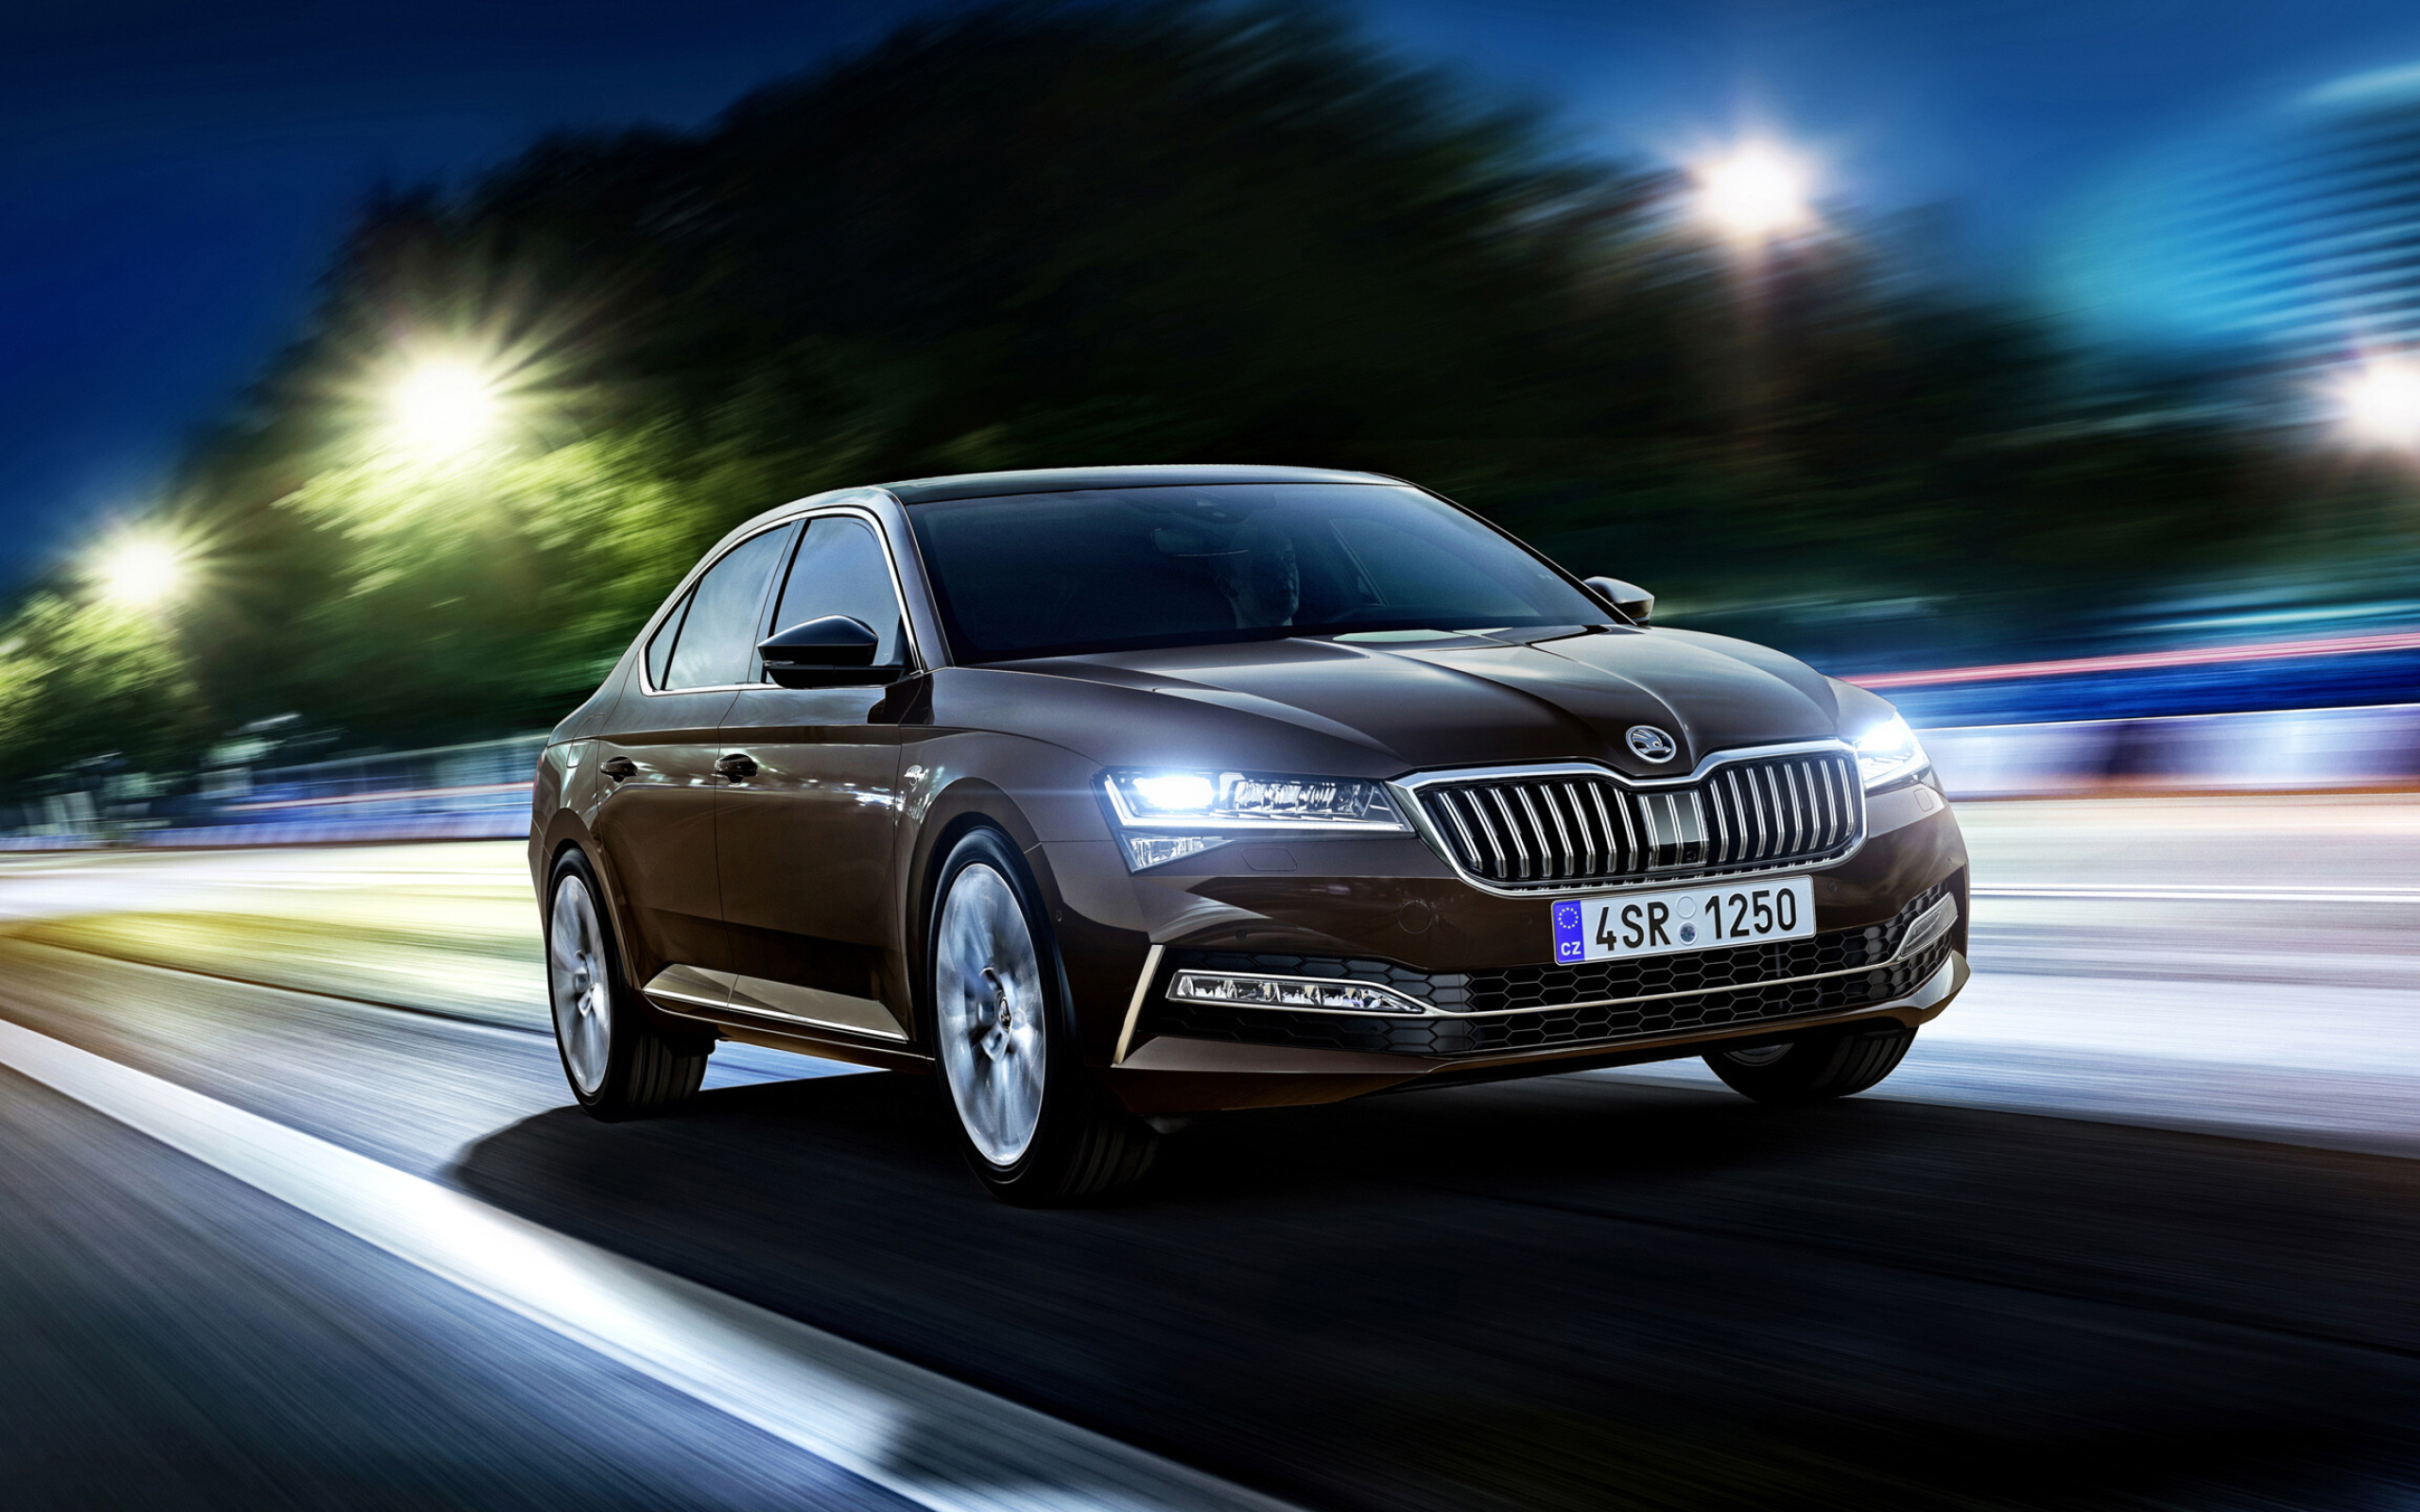 Skoda: Superb Laurin and Klement, 2019, The top petrol variant in the Superb lineup. 2560x1600 HD Wallpaper.